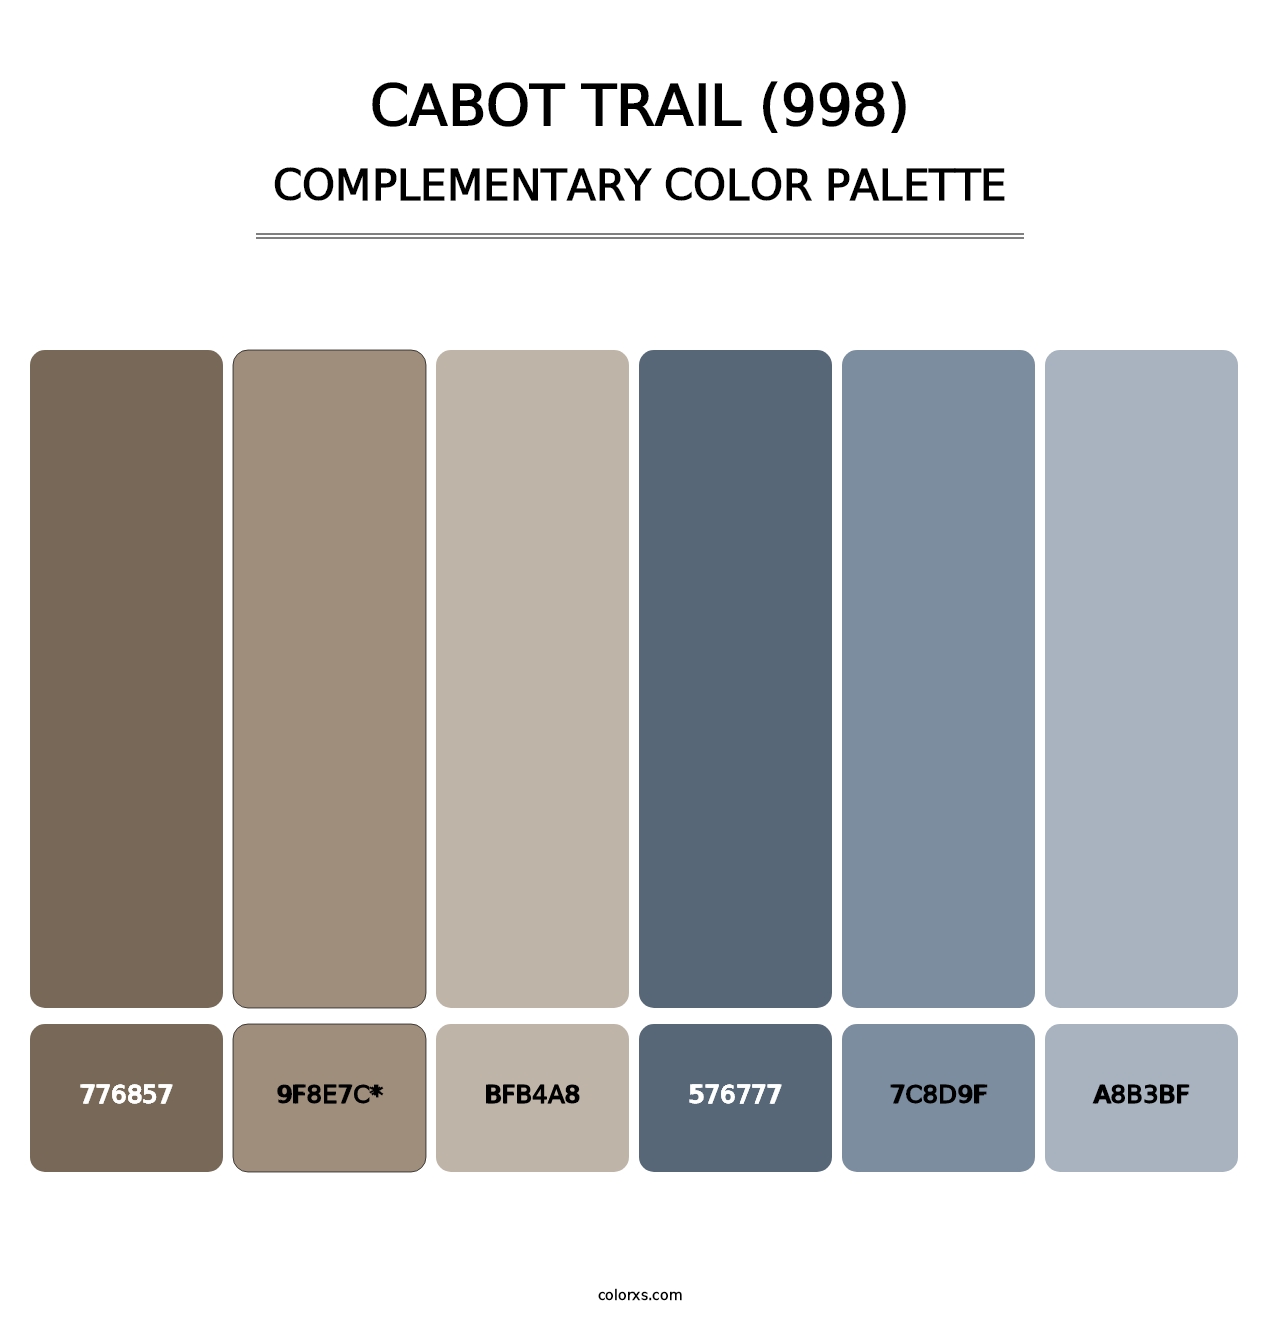 Cabot Trail (998) - Complementary Color Palette